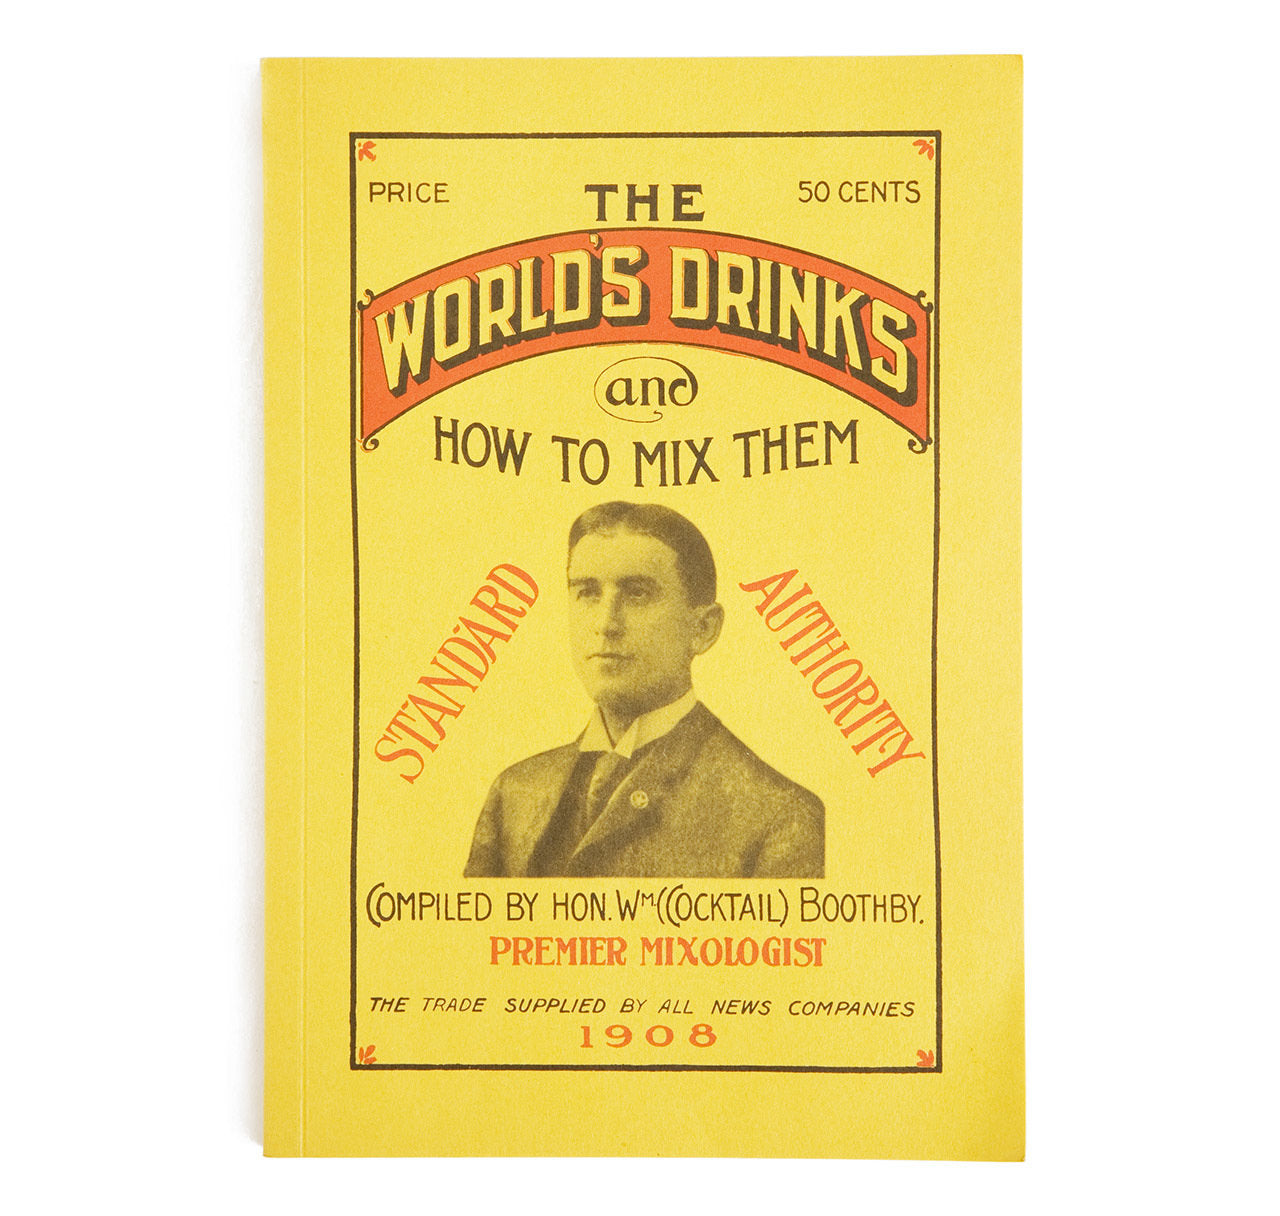 World's Drinks and How to Mix Them by William Boothby